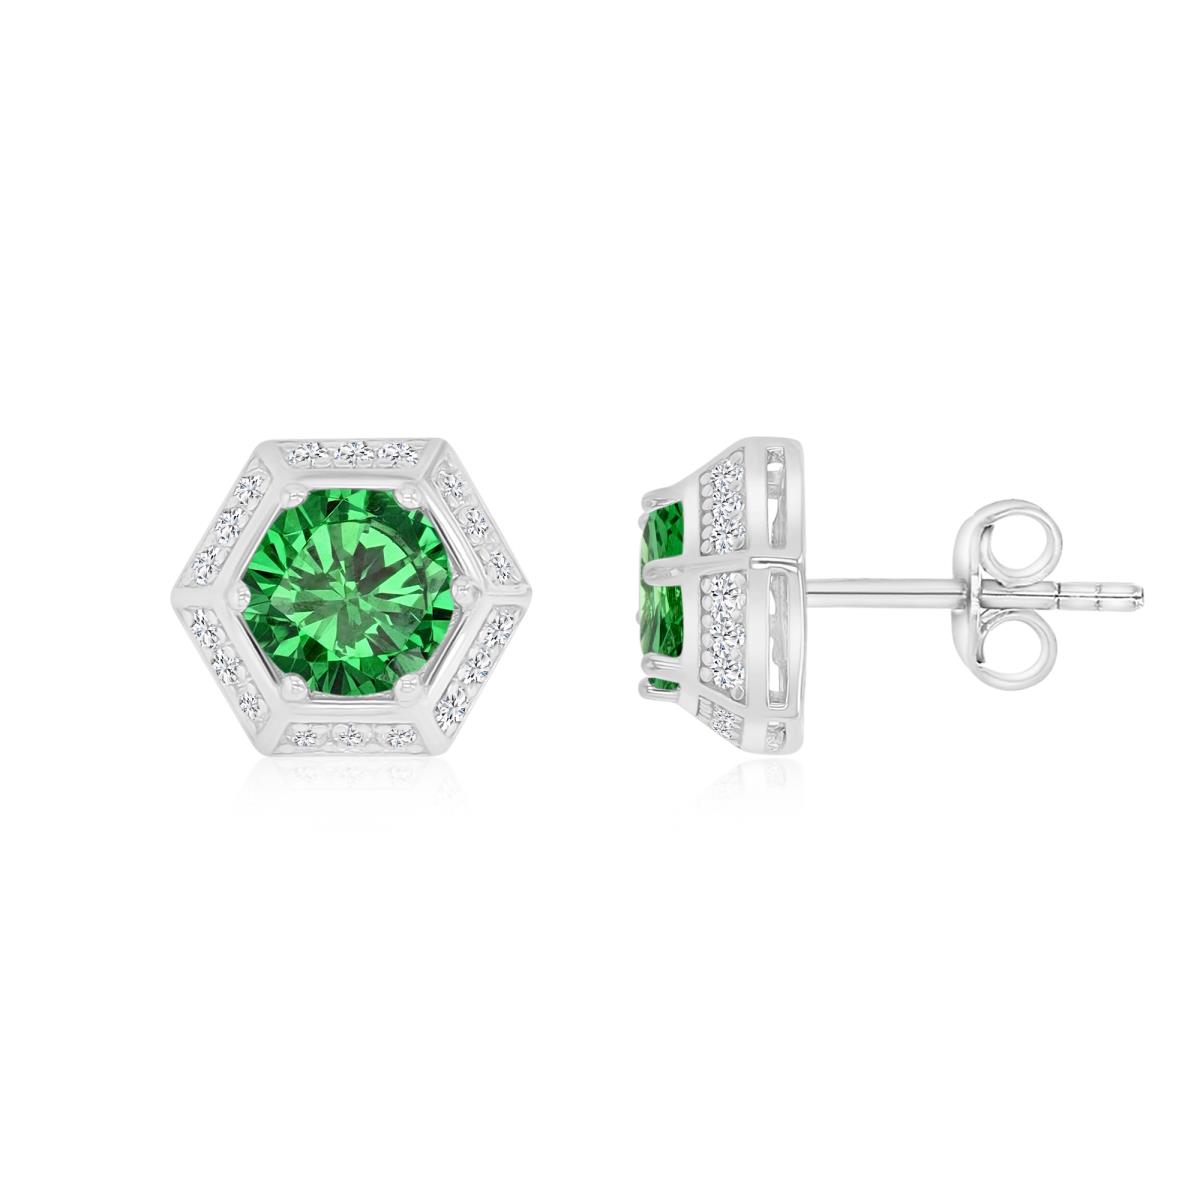 Sterling Silver Rhodium 9X5MM Polished Green & White CZ Octagon Stud Earrings